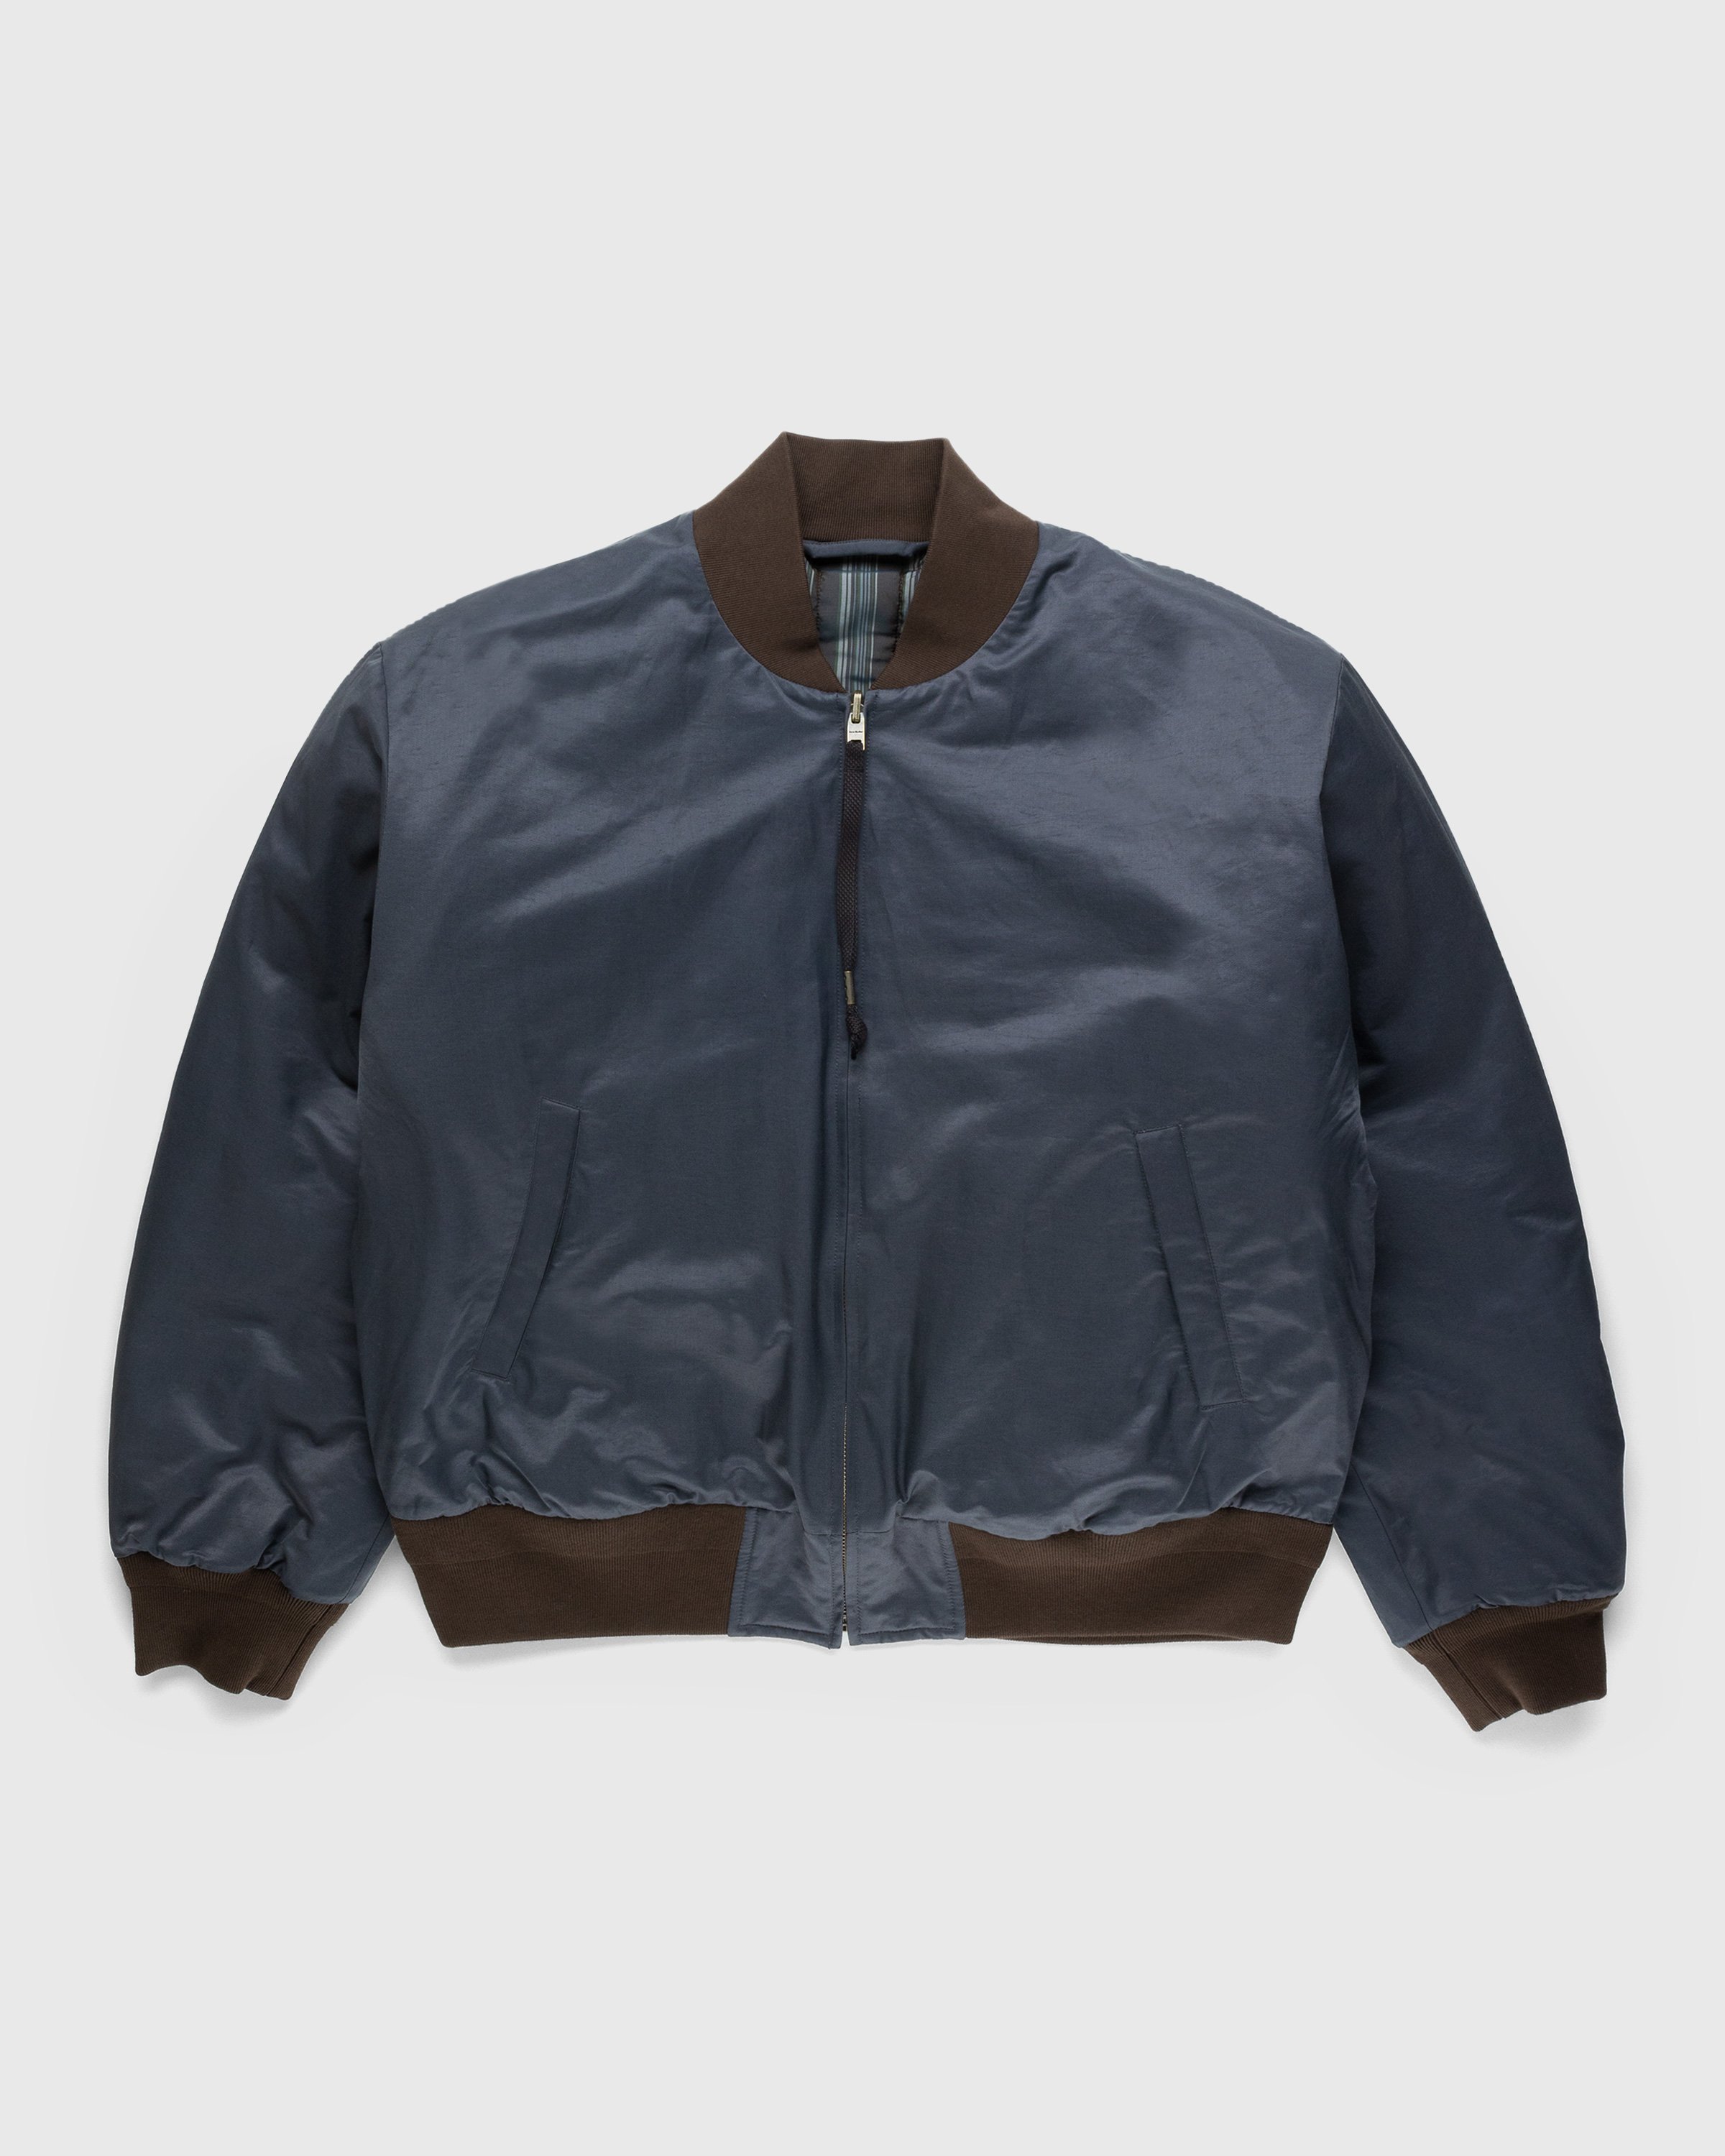 Acne Studios - Reversible Patch Bomber Jacket Anthracite Grey - Clothing - Brown - Image 2